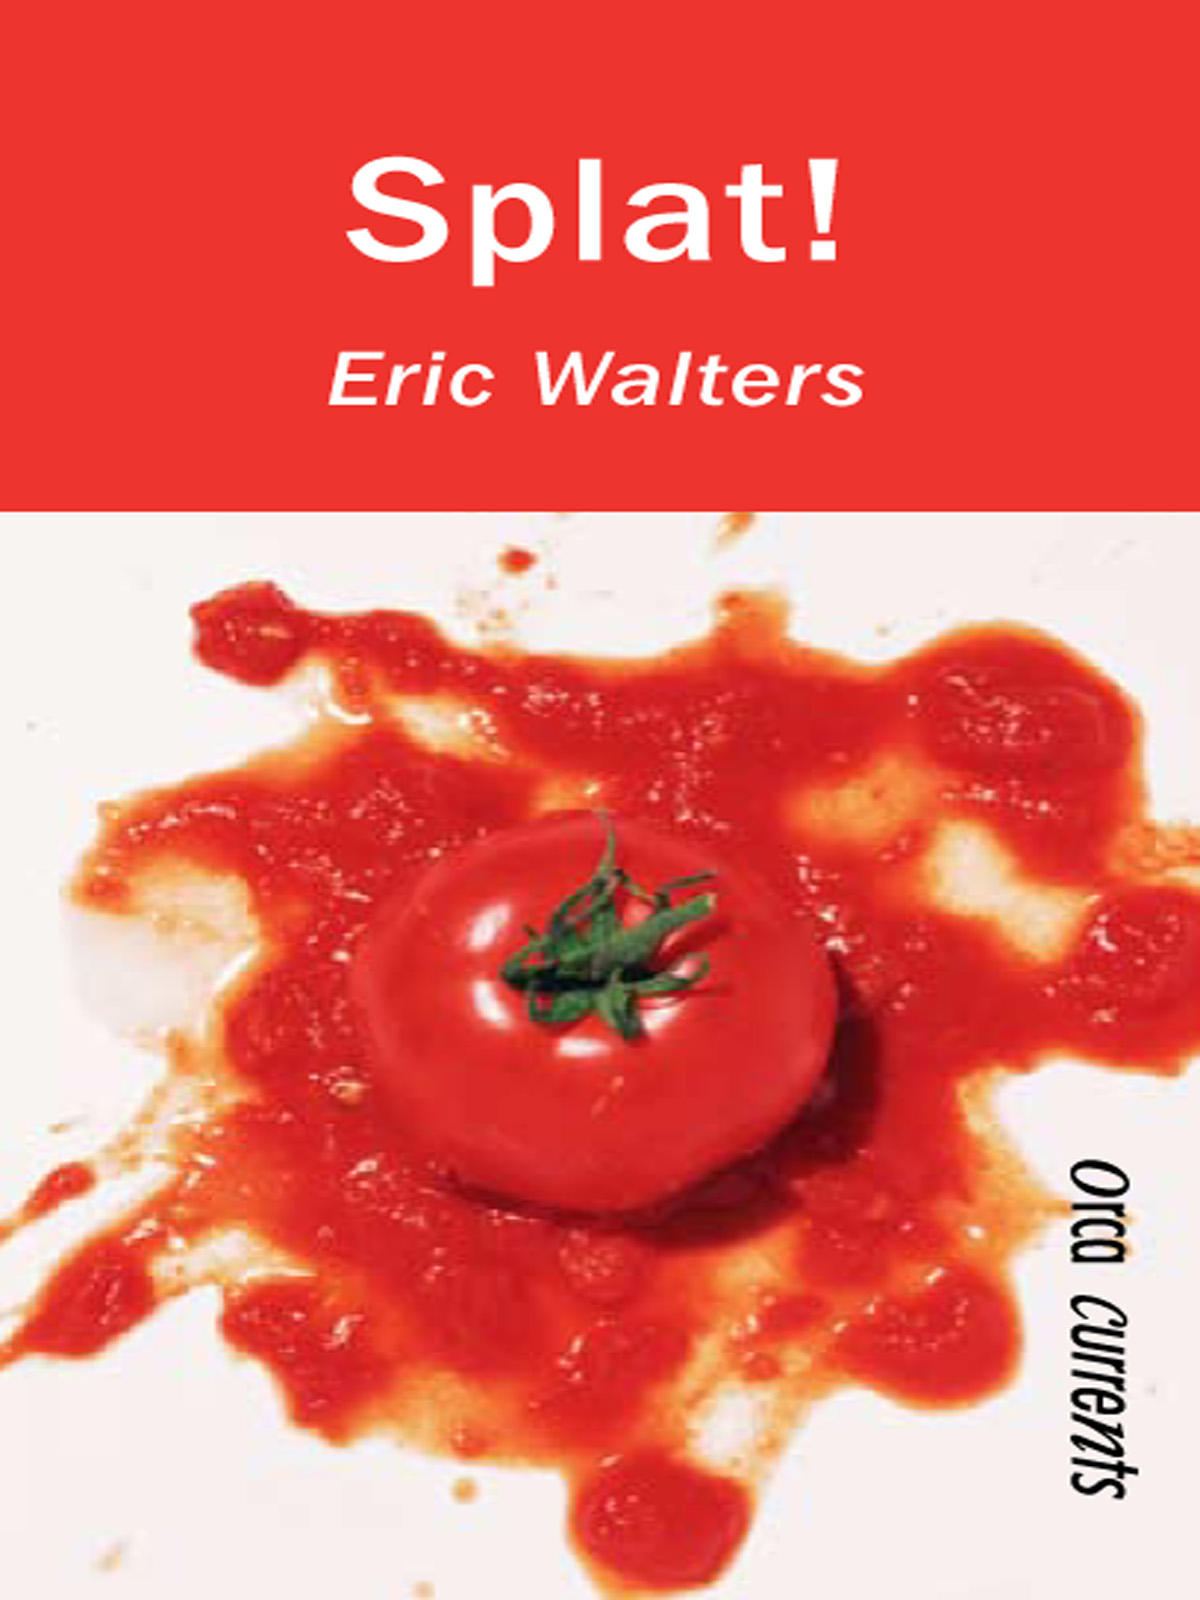 Splat! (2008) by Eric Walters